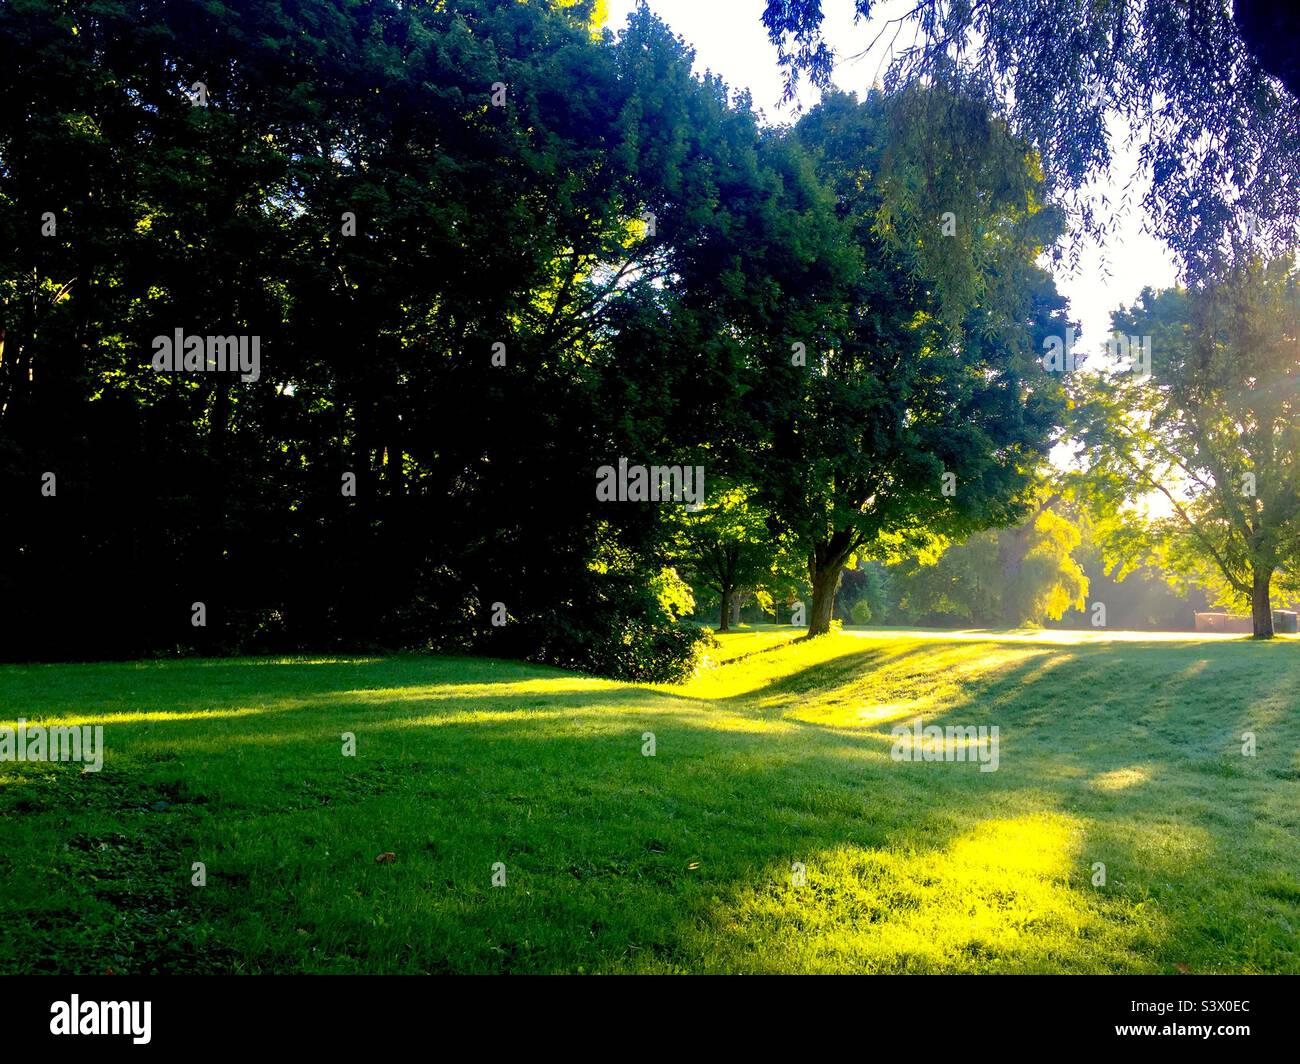 Light and shadows in an urban park. Morning shows the day. No people. Stock Photo